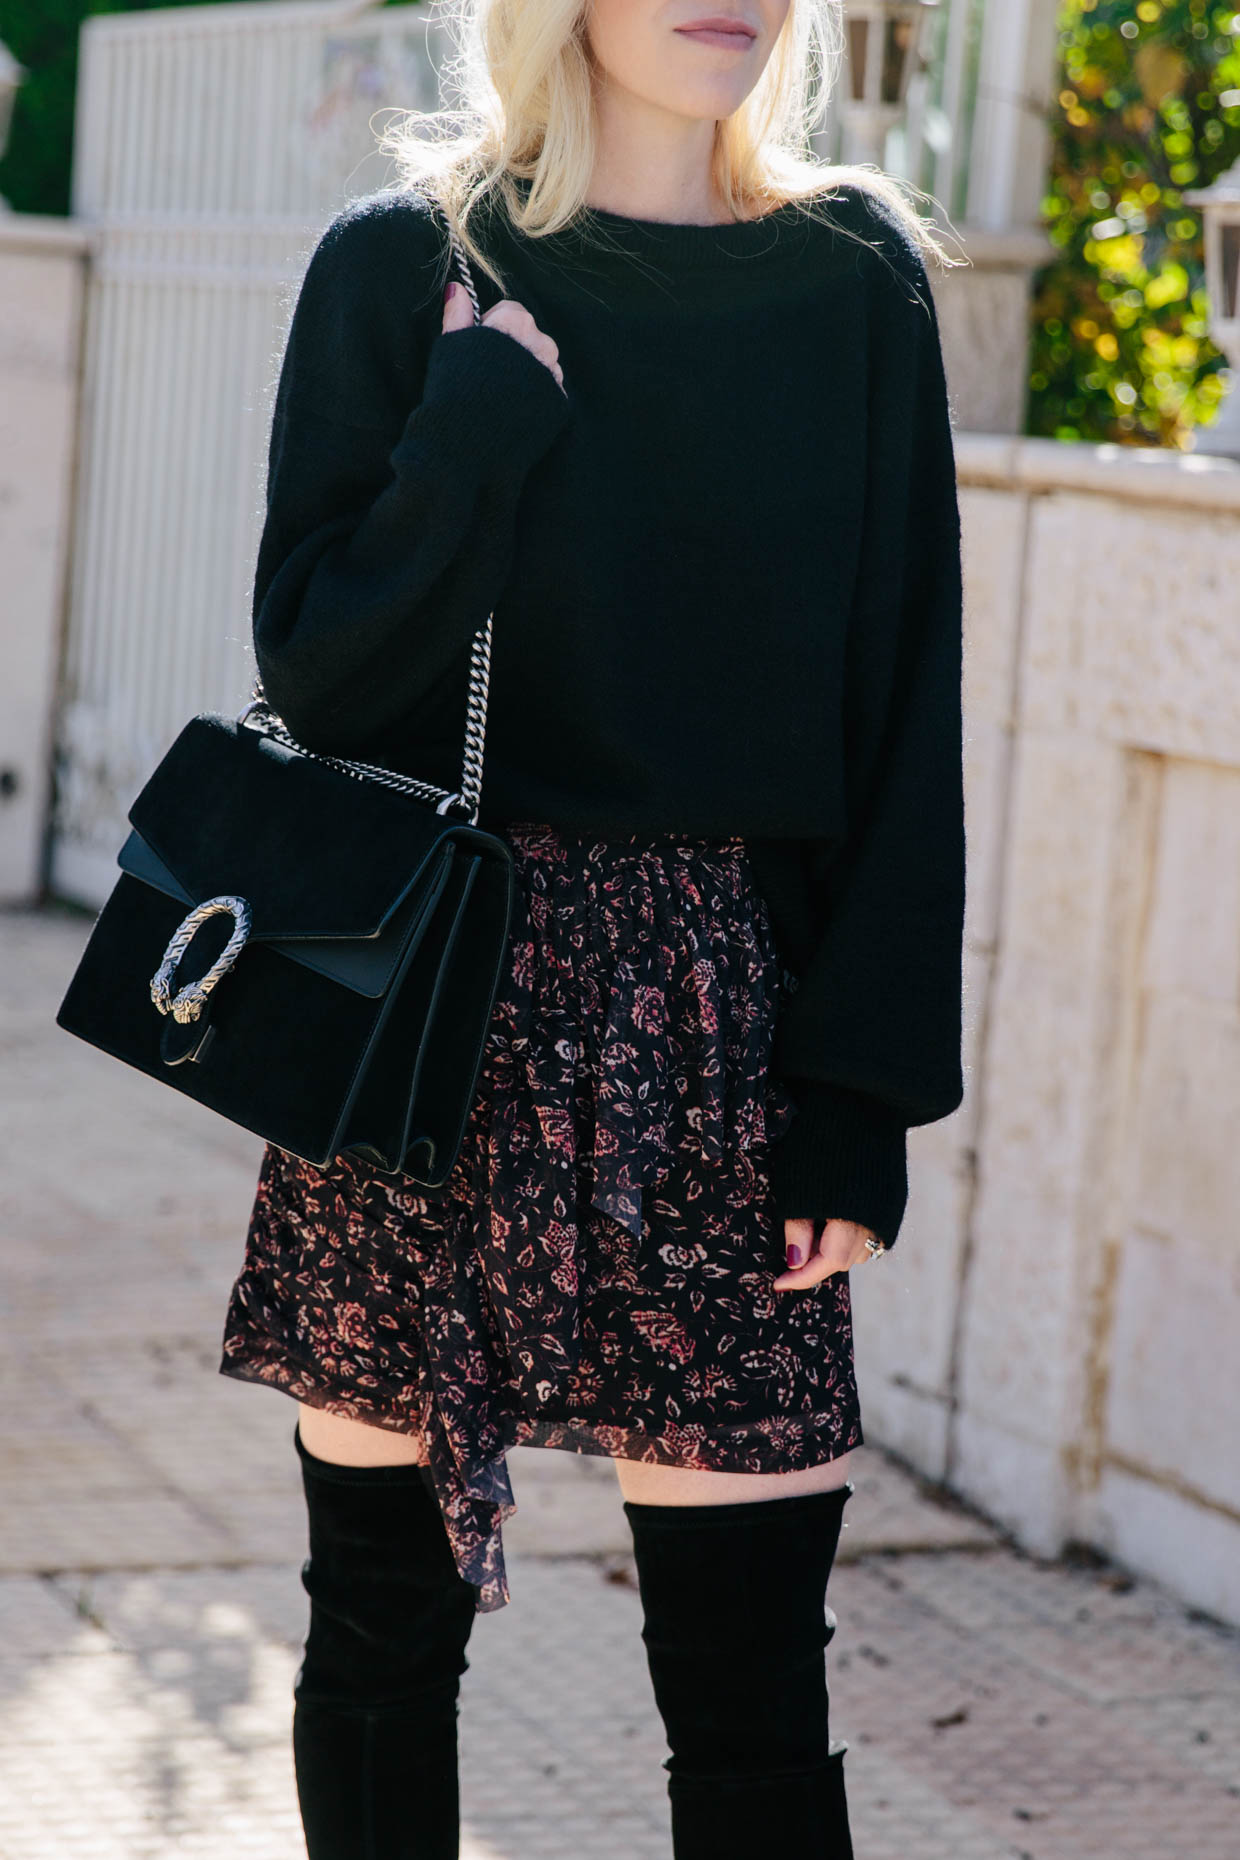 Meagan Brandon fashion blogger of Meagan's Moda styles a snakeskin print  midi skirt for fall with suede sandals and suede Saint Laurent sac de jour  - Meagan's Moda